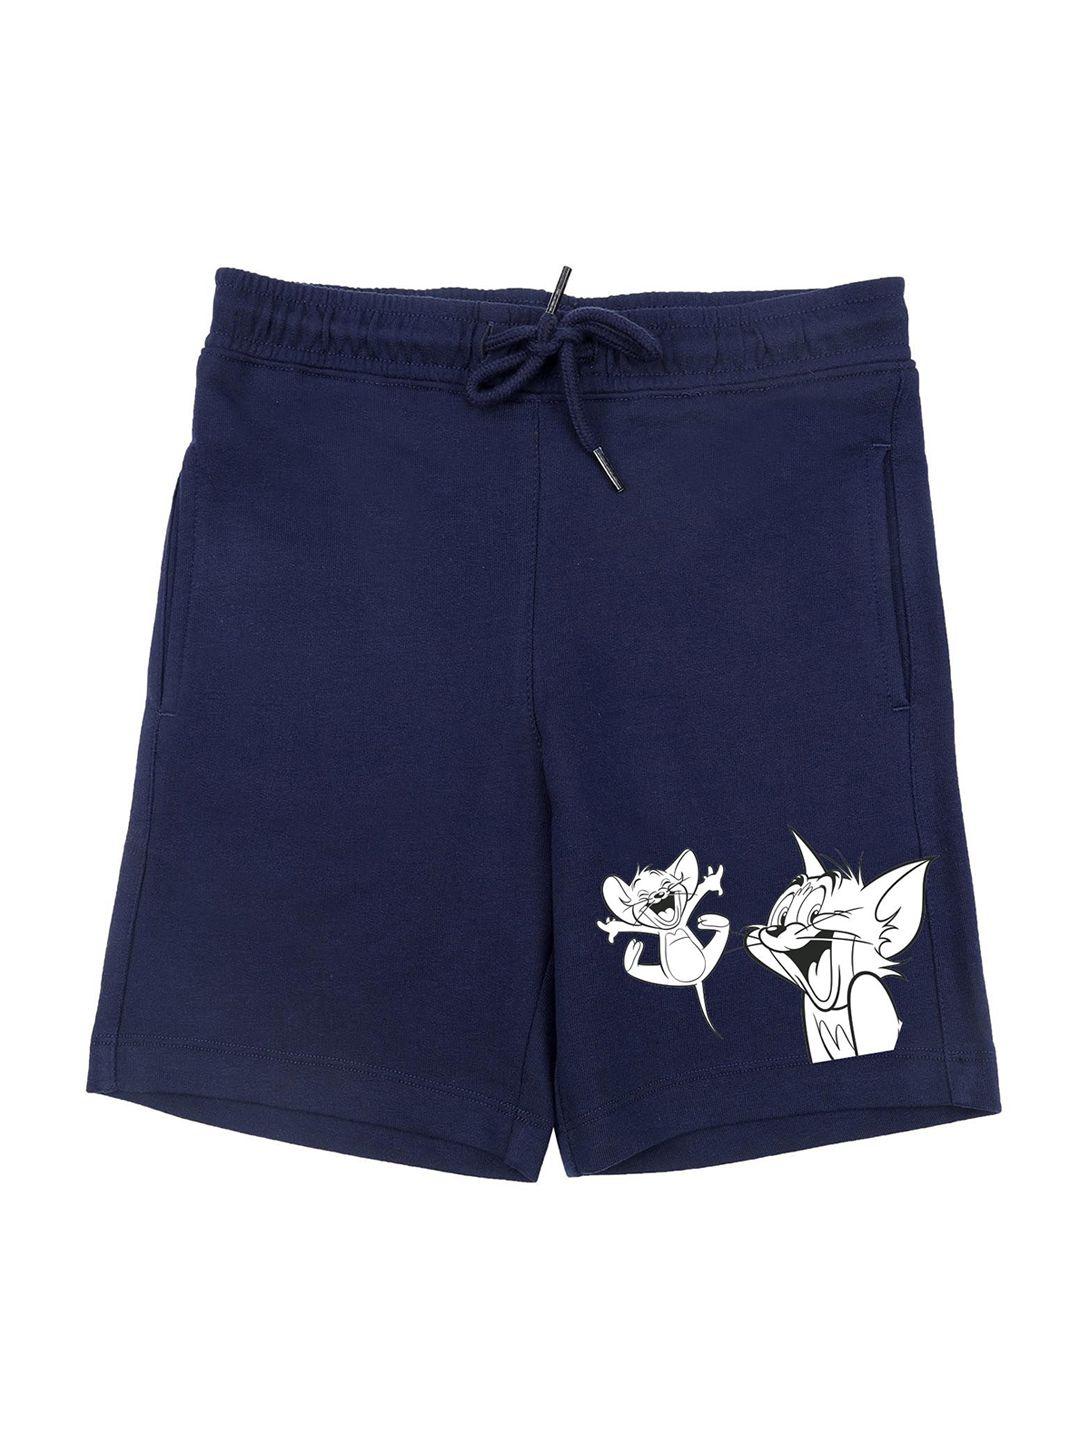 tom-&-jerry-by-wear-your-mind-boys-navy-blue-tom-&-jerry-shorts